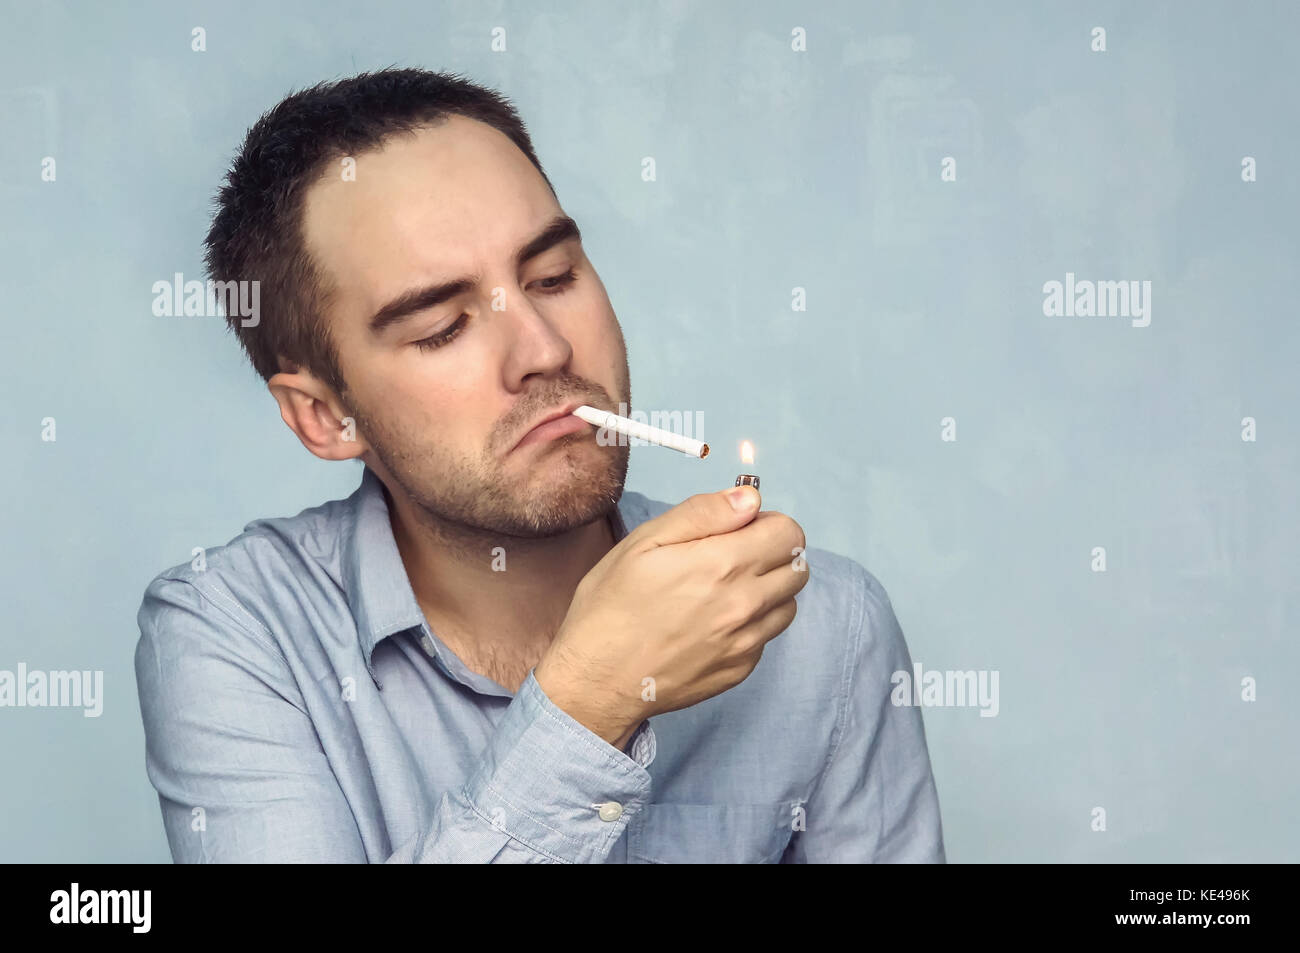 Young man lighting cigarette. Businessman in a shirt he lights a cigarette from the flame of the lighter on a blue background. Stock Photo